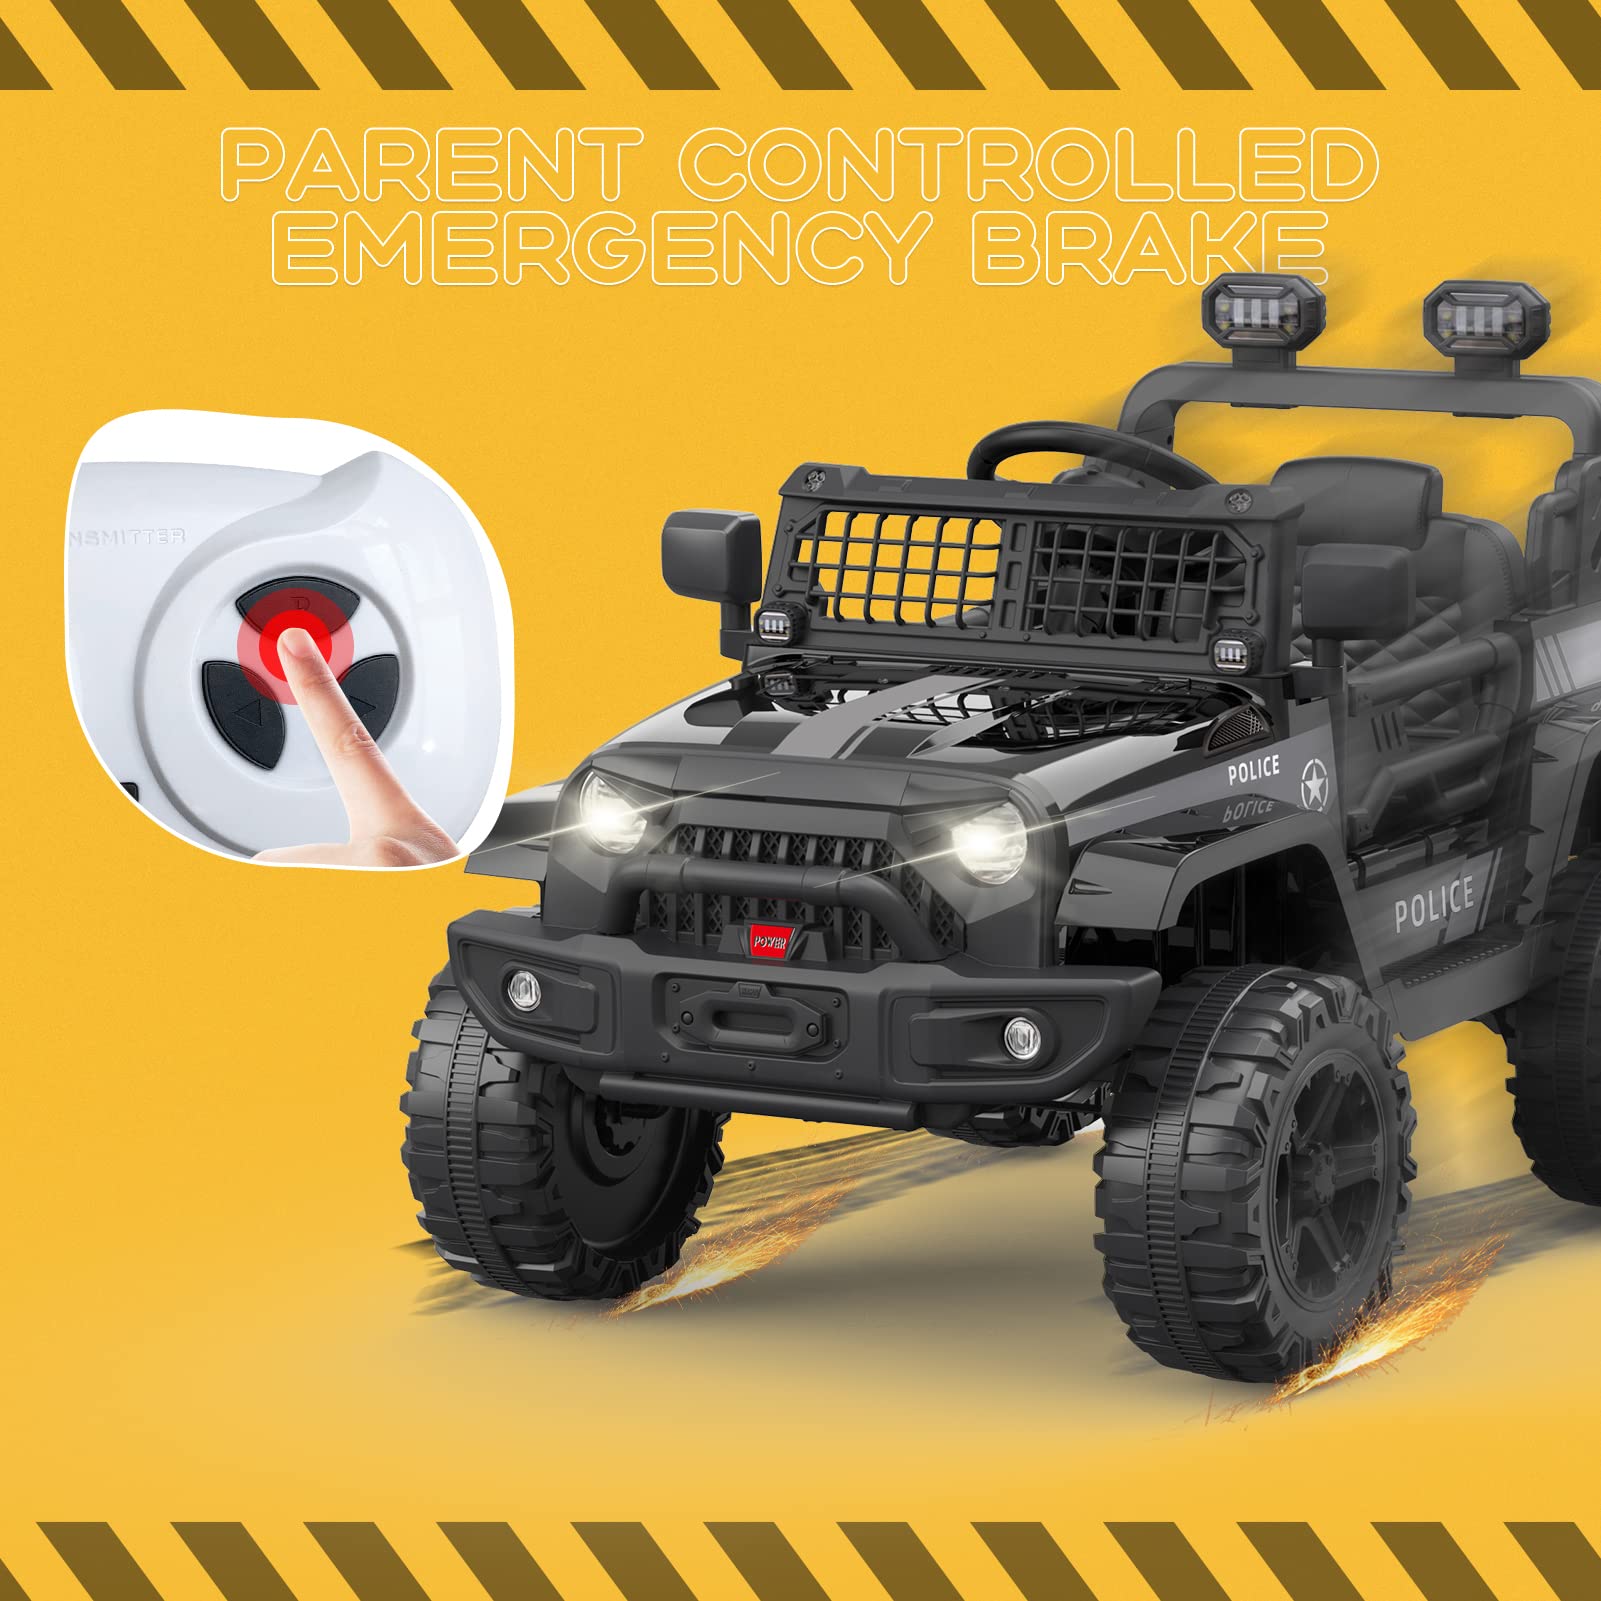 Ride on Truck Car 12V Kids Electric Mini Jeep with Remote Control Spring Suspension, LED Lights, Bluetooth, 2 Speeds (Black) - image 3 of 8